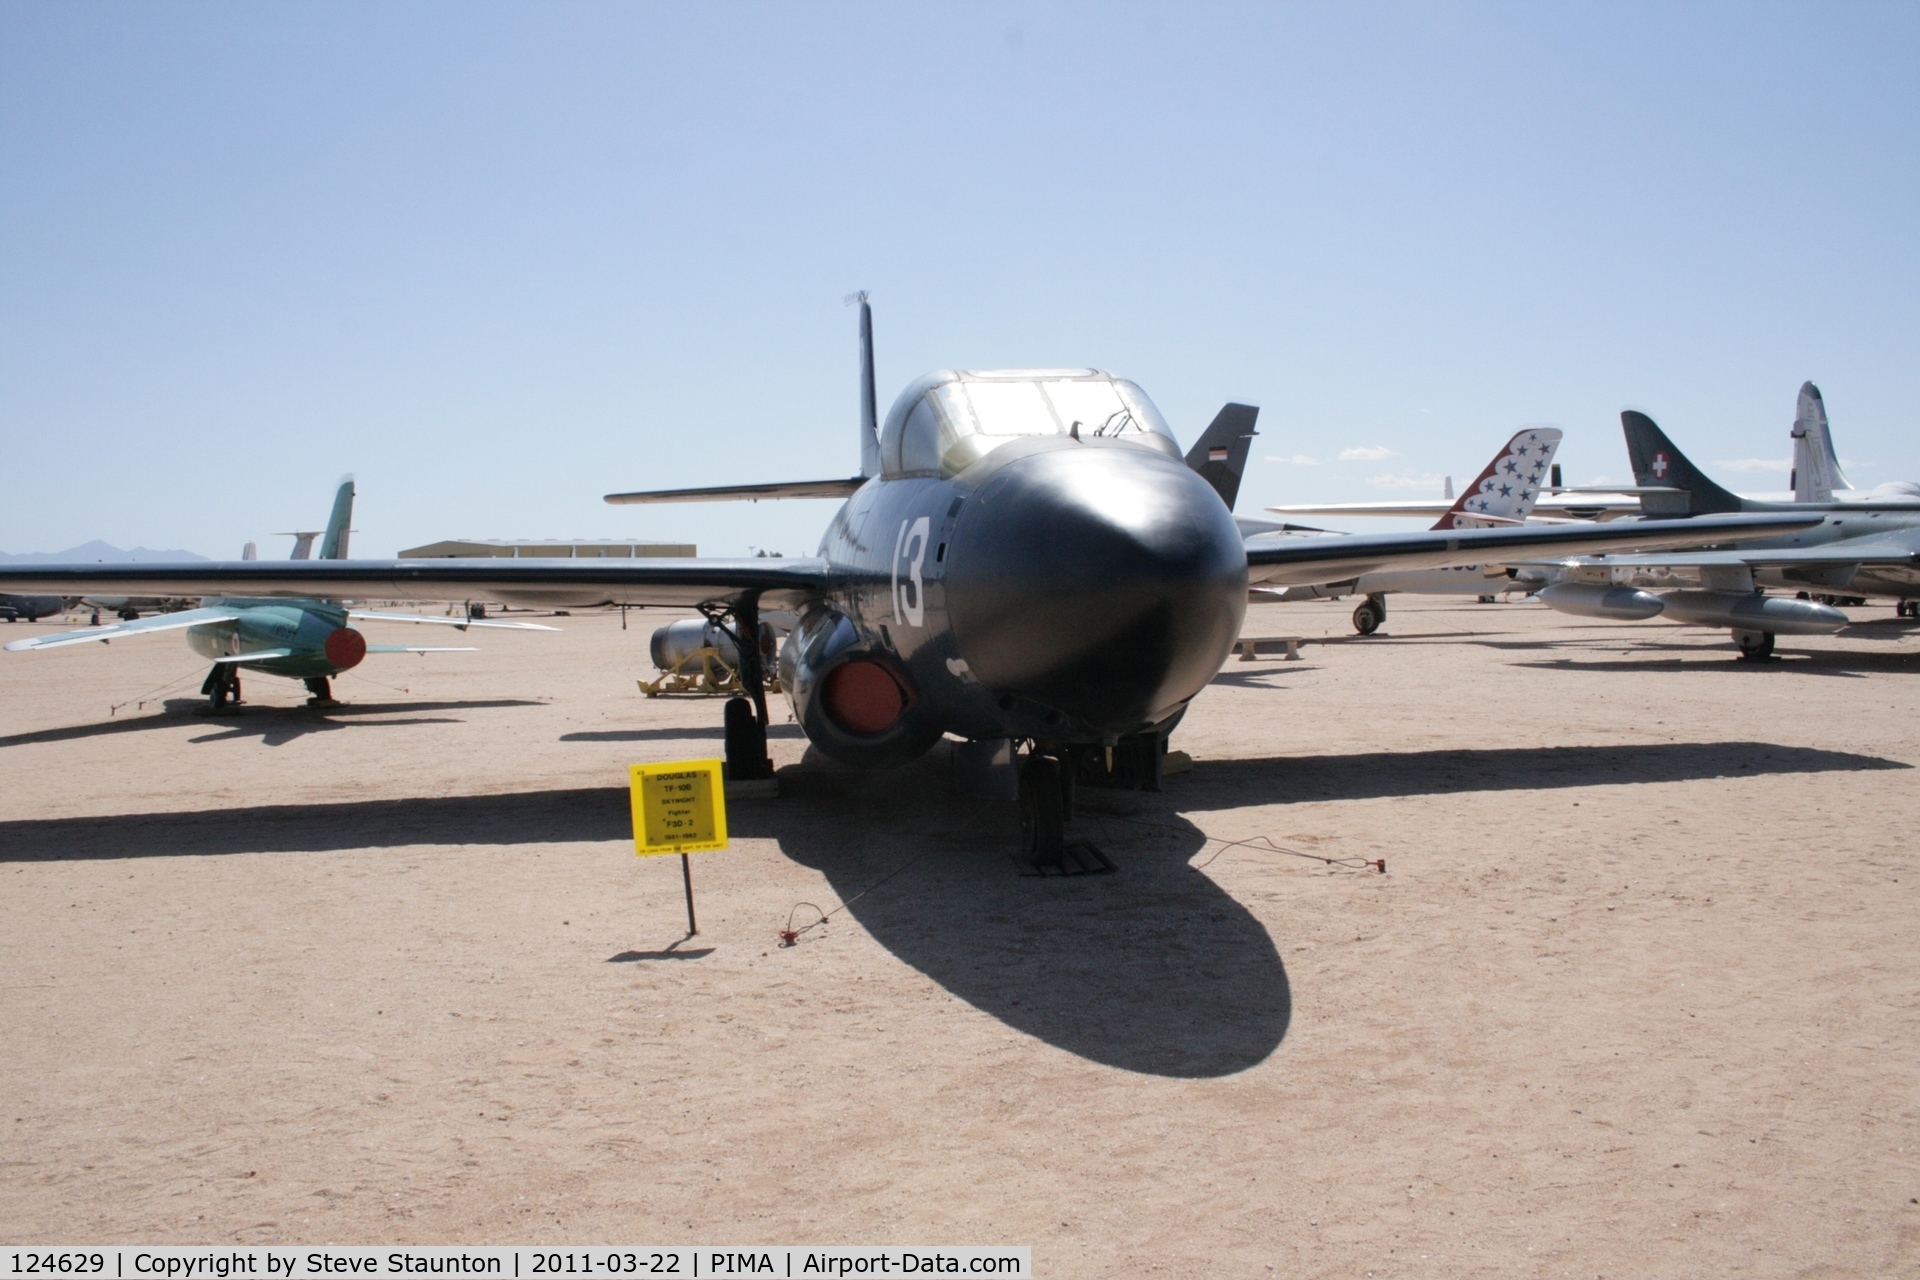 124629, Douglas TF-10B Skynight C/N 7499, Taken at Pima Air and Space Museum, in March 2011 whilst on an Aeroprint Aviation tour